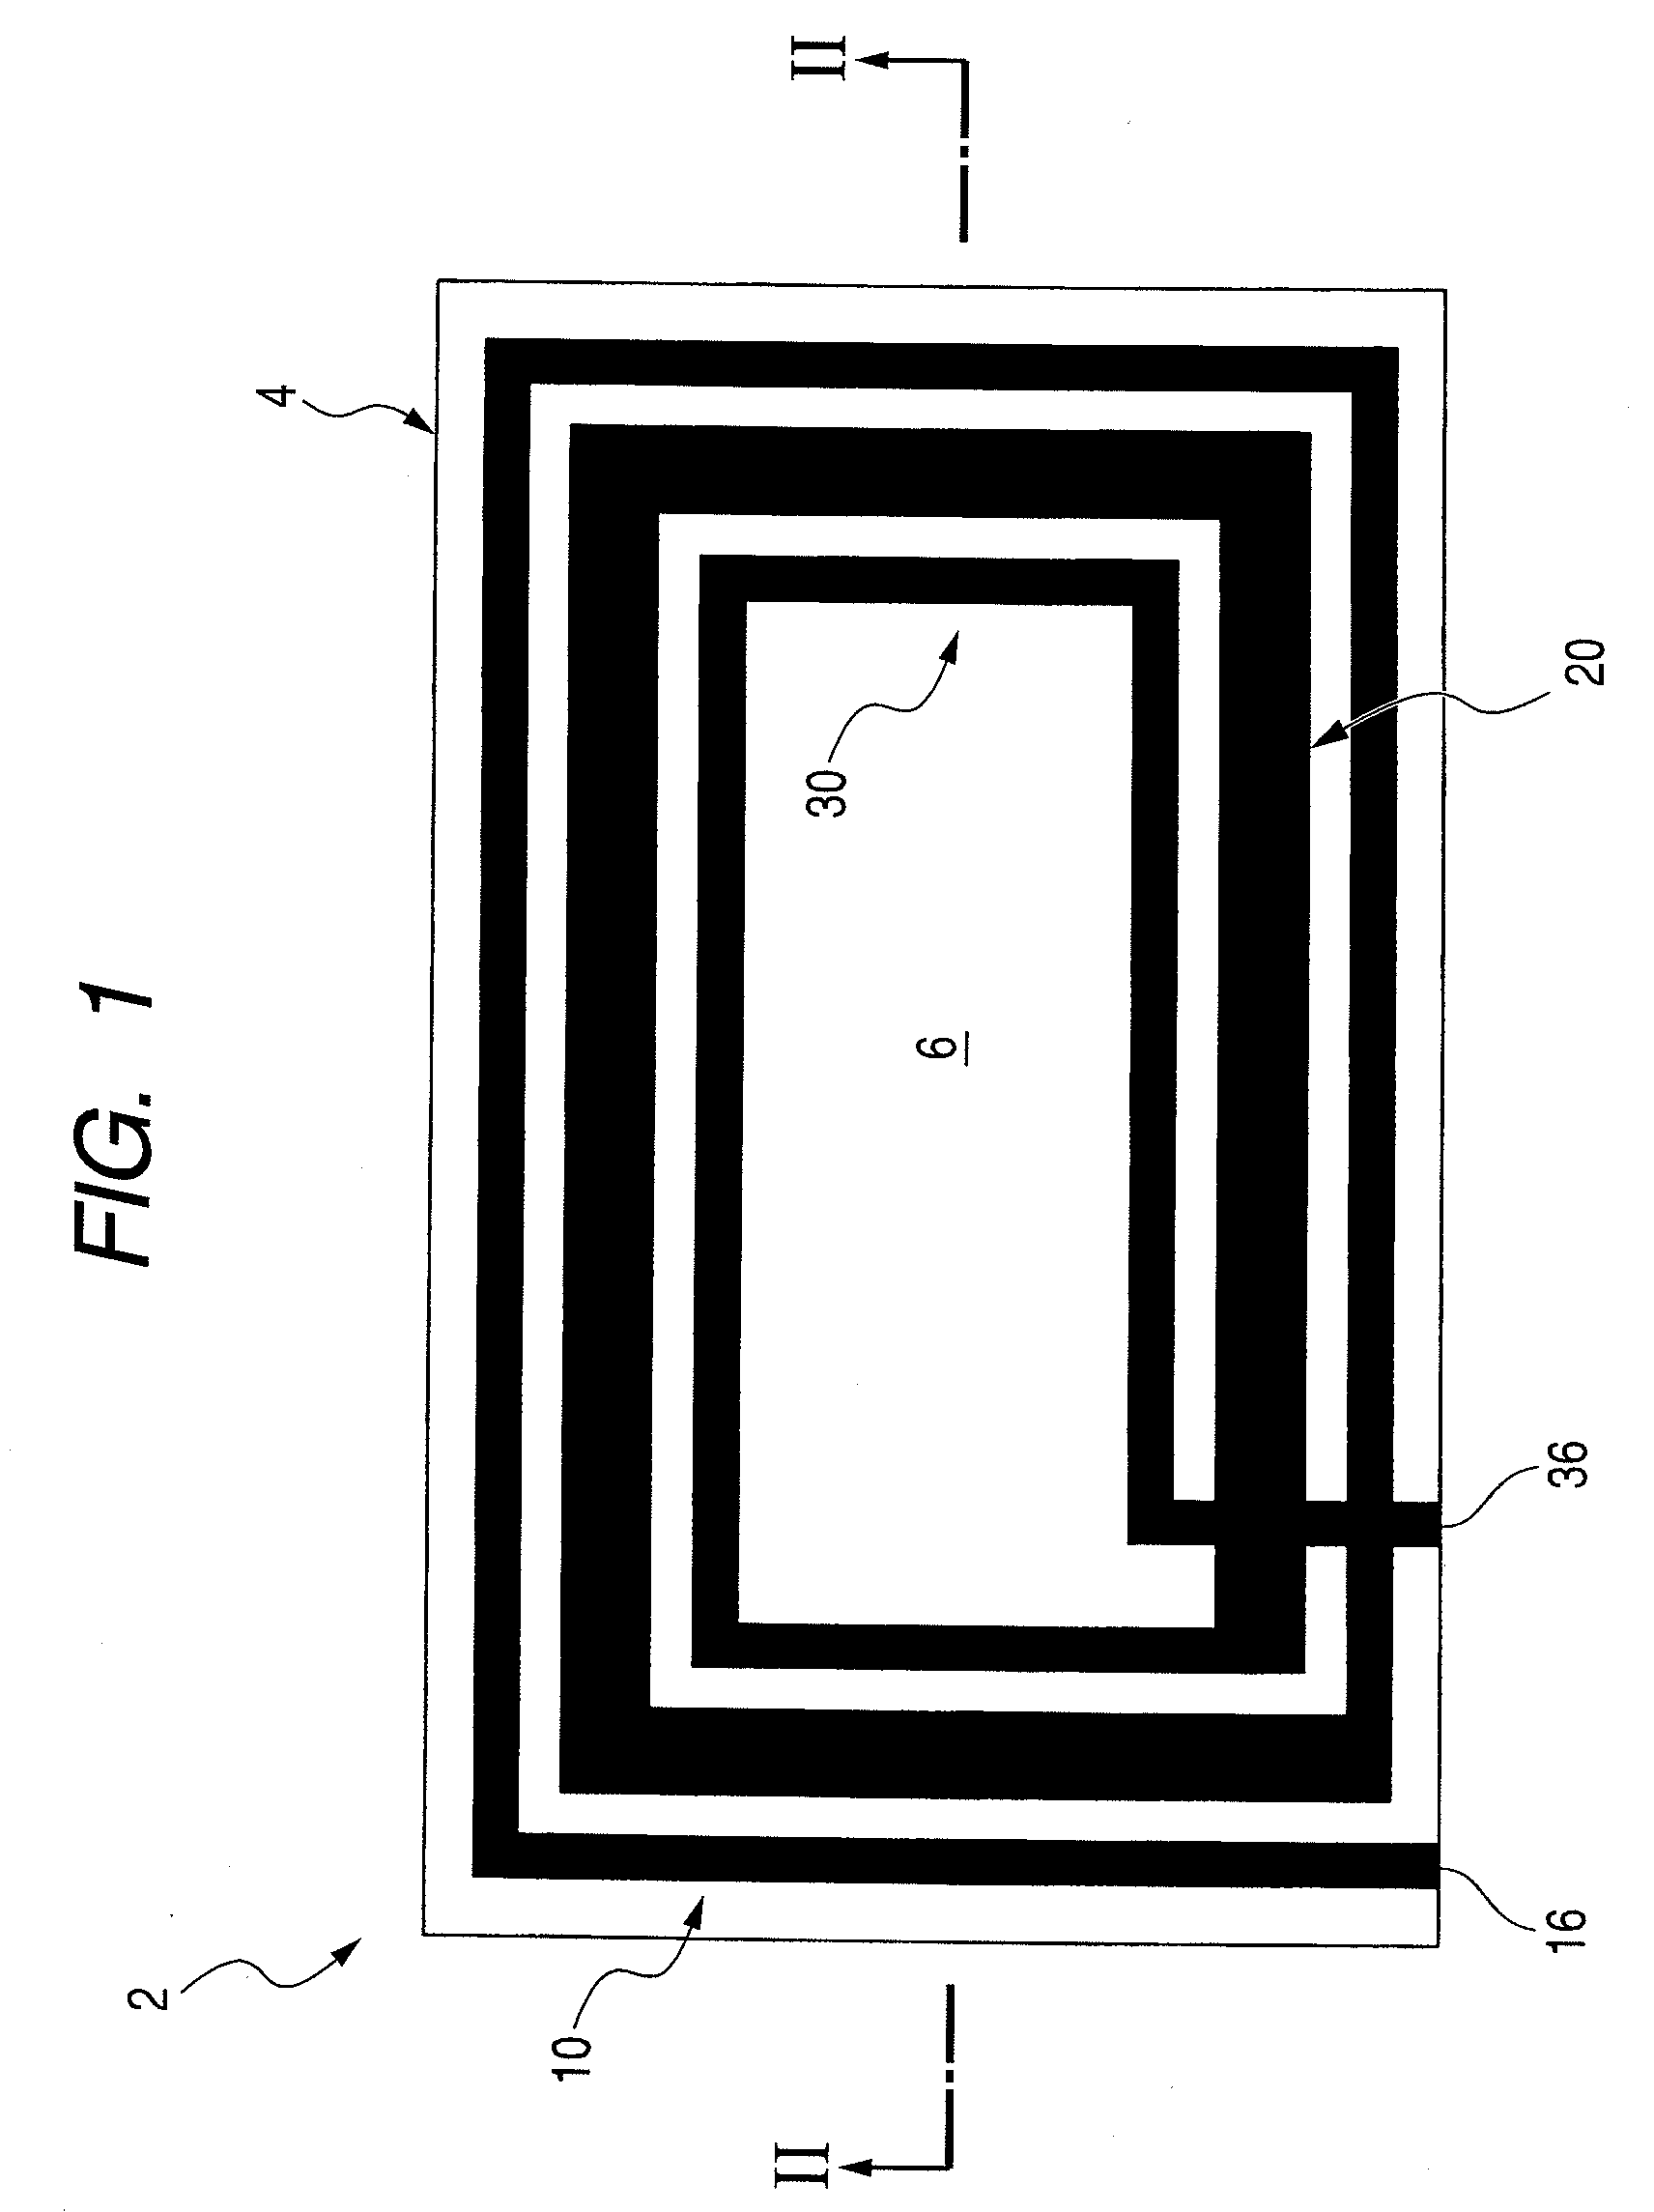 Loop antenna device with large opening area